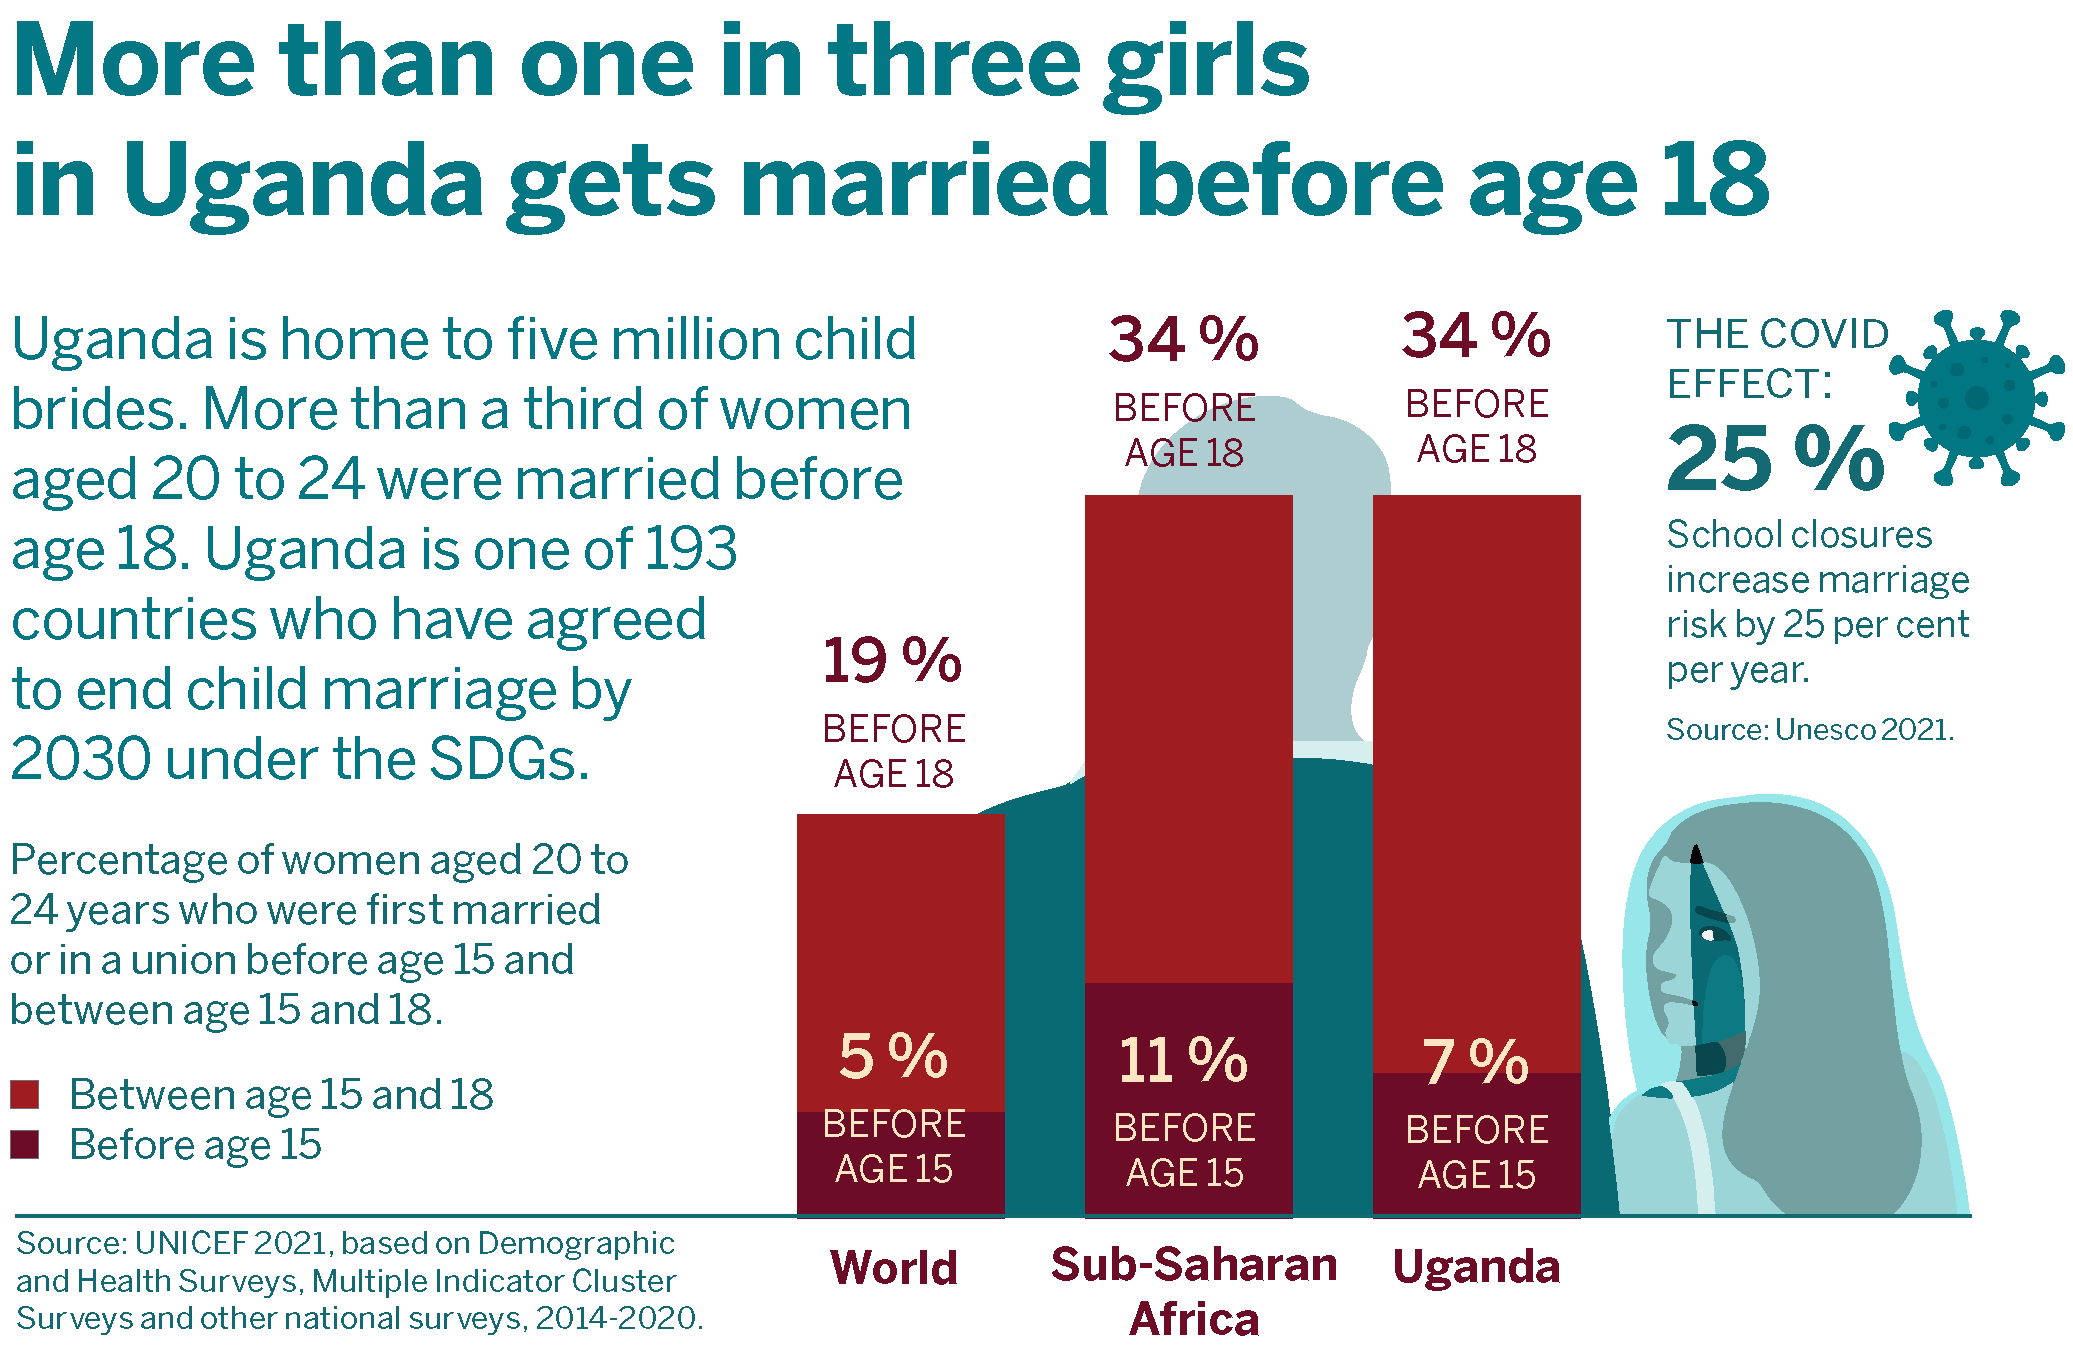 More than one in three girls in Uganda gets married before age 18